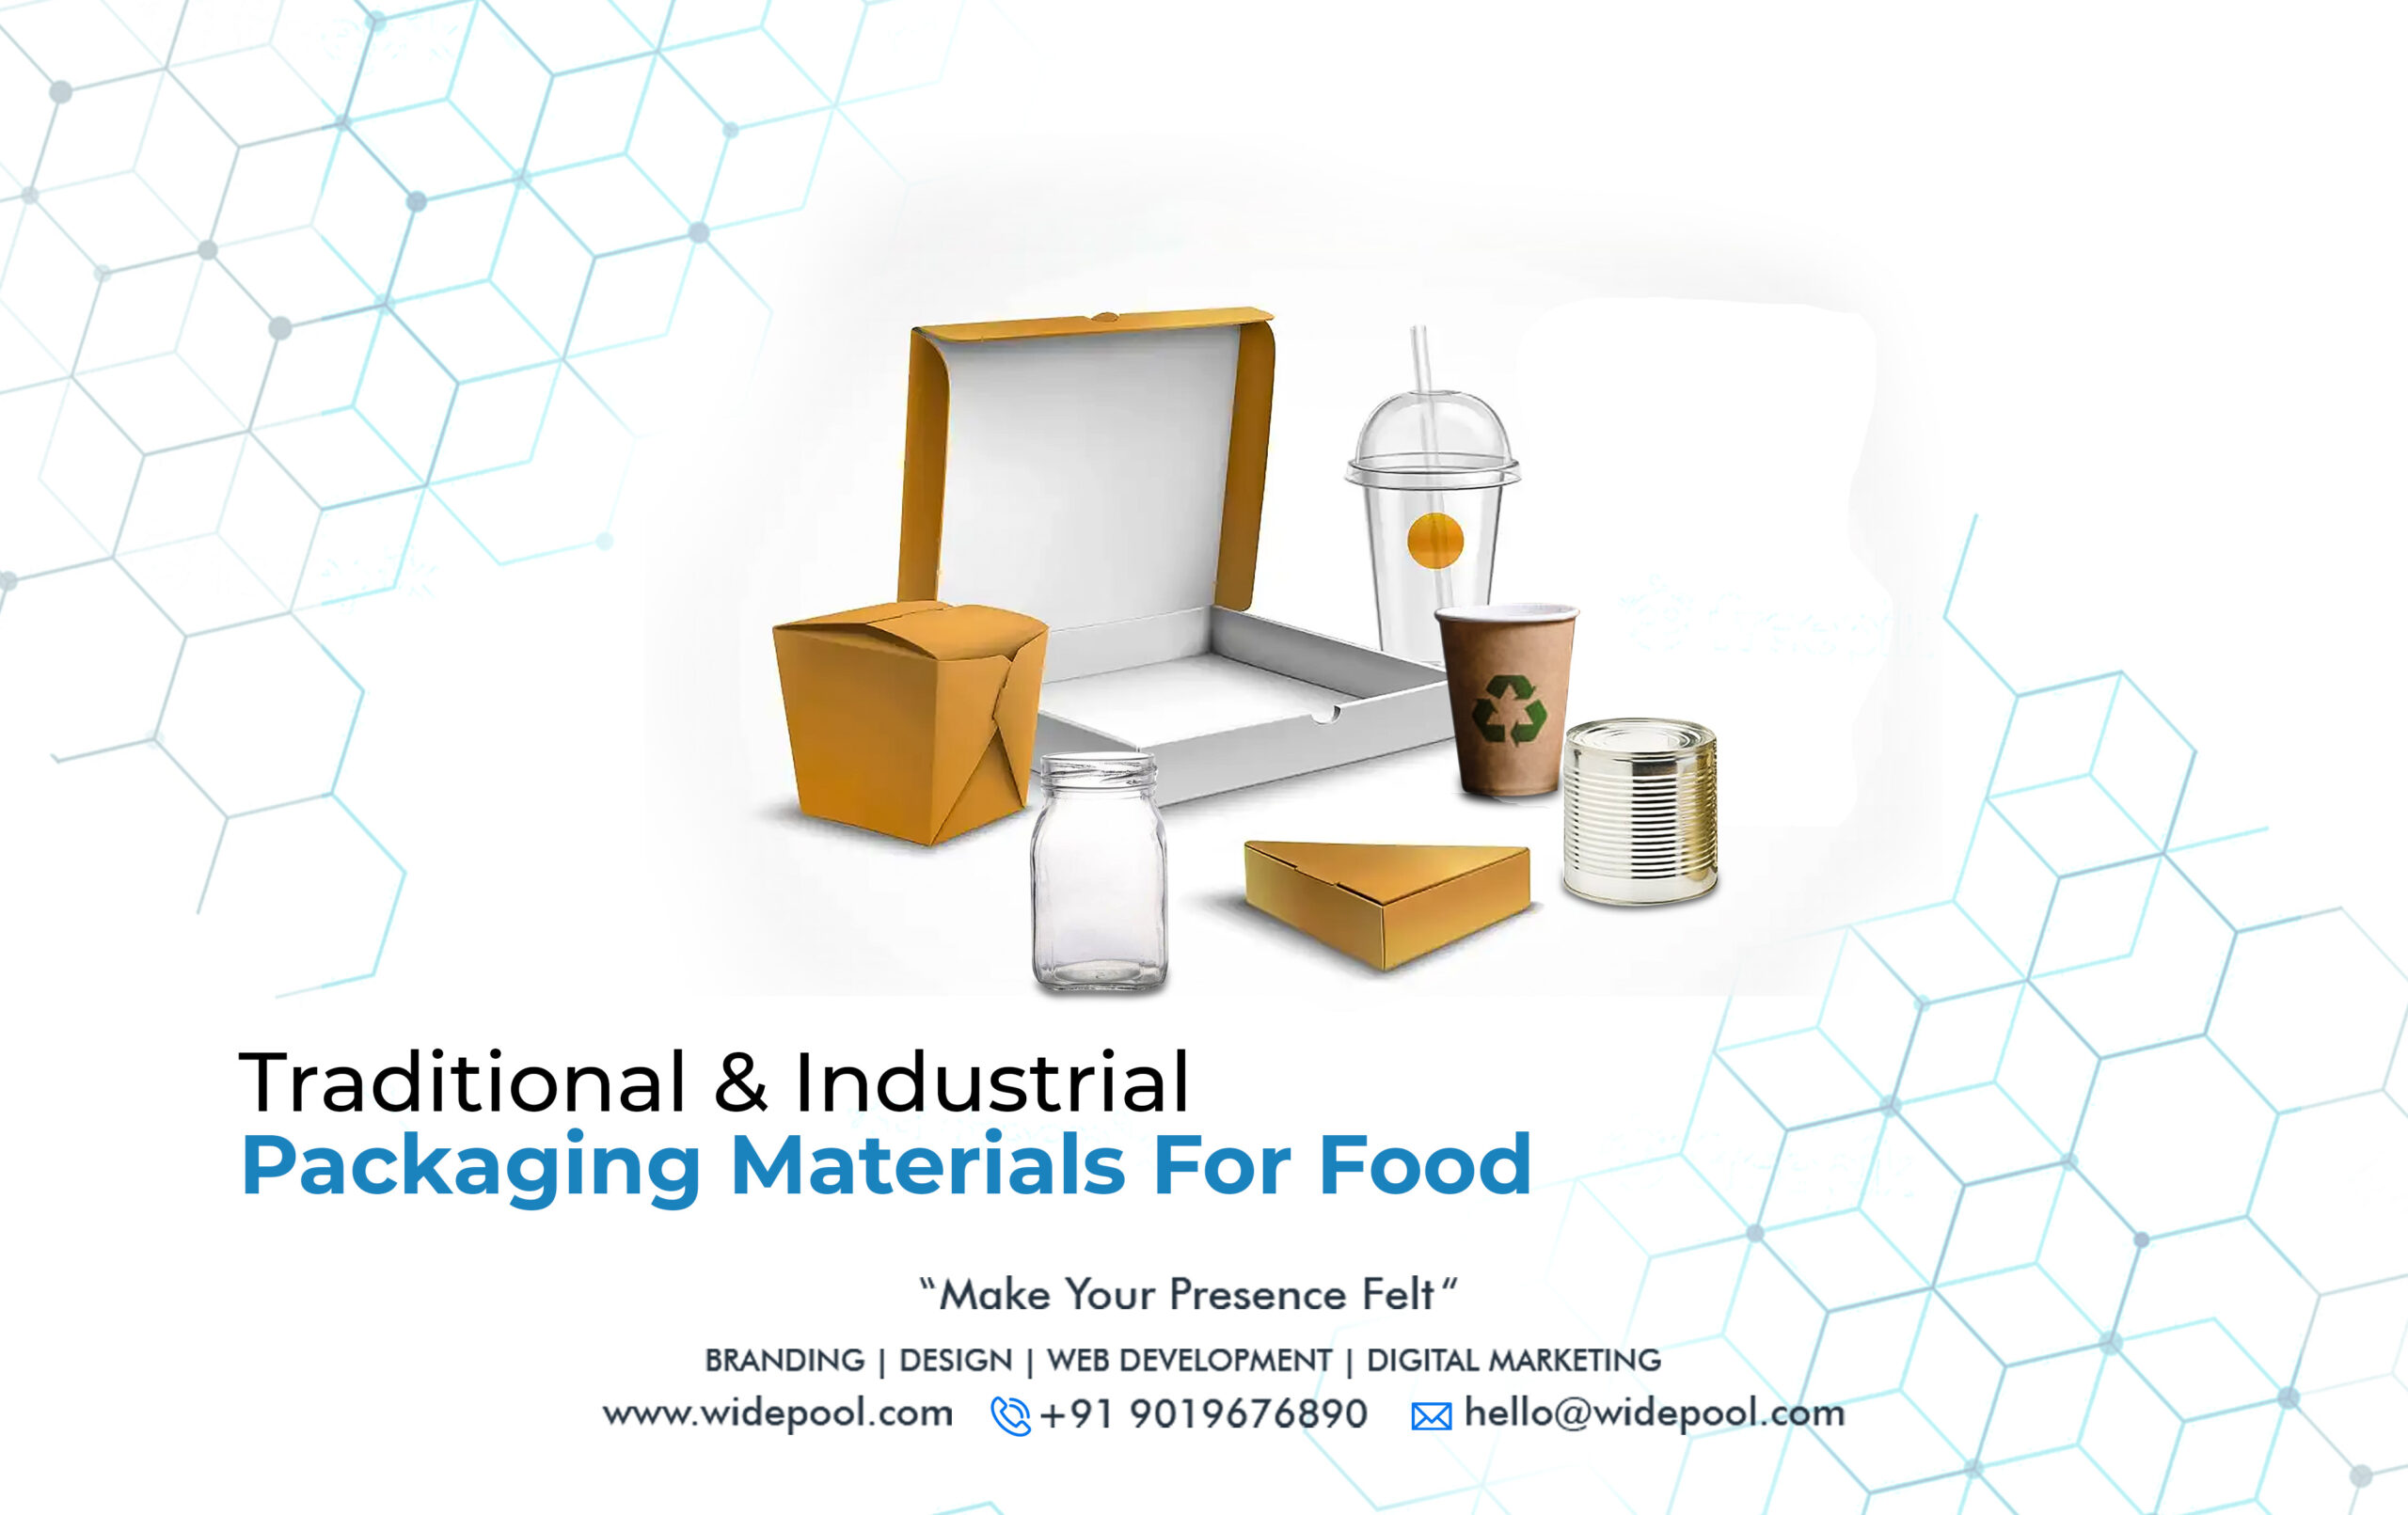 Traditional & Industrial Packaging Materials for Food